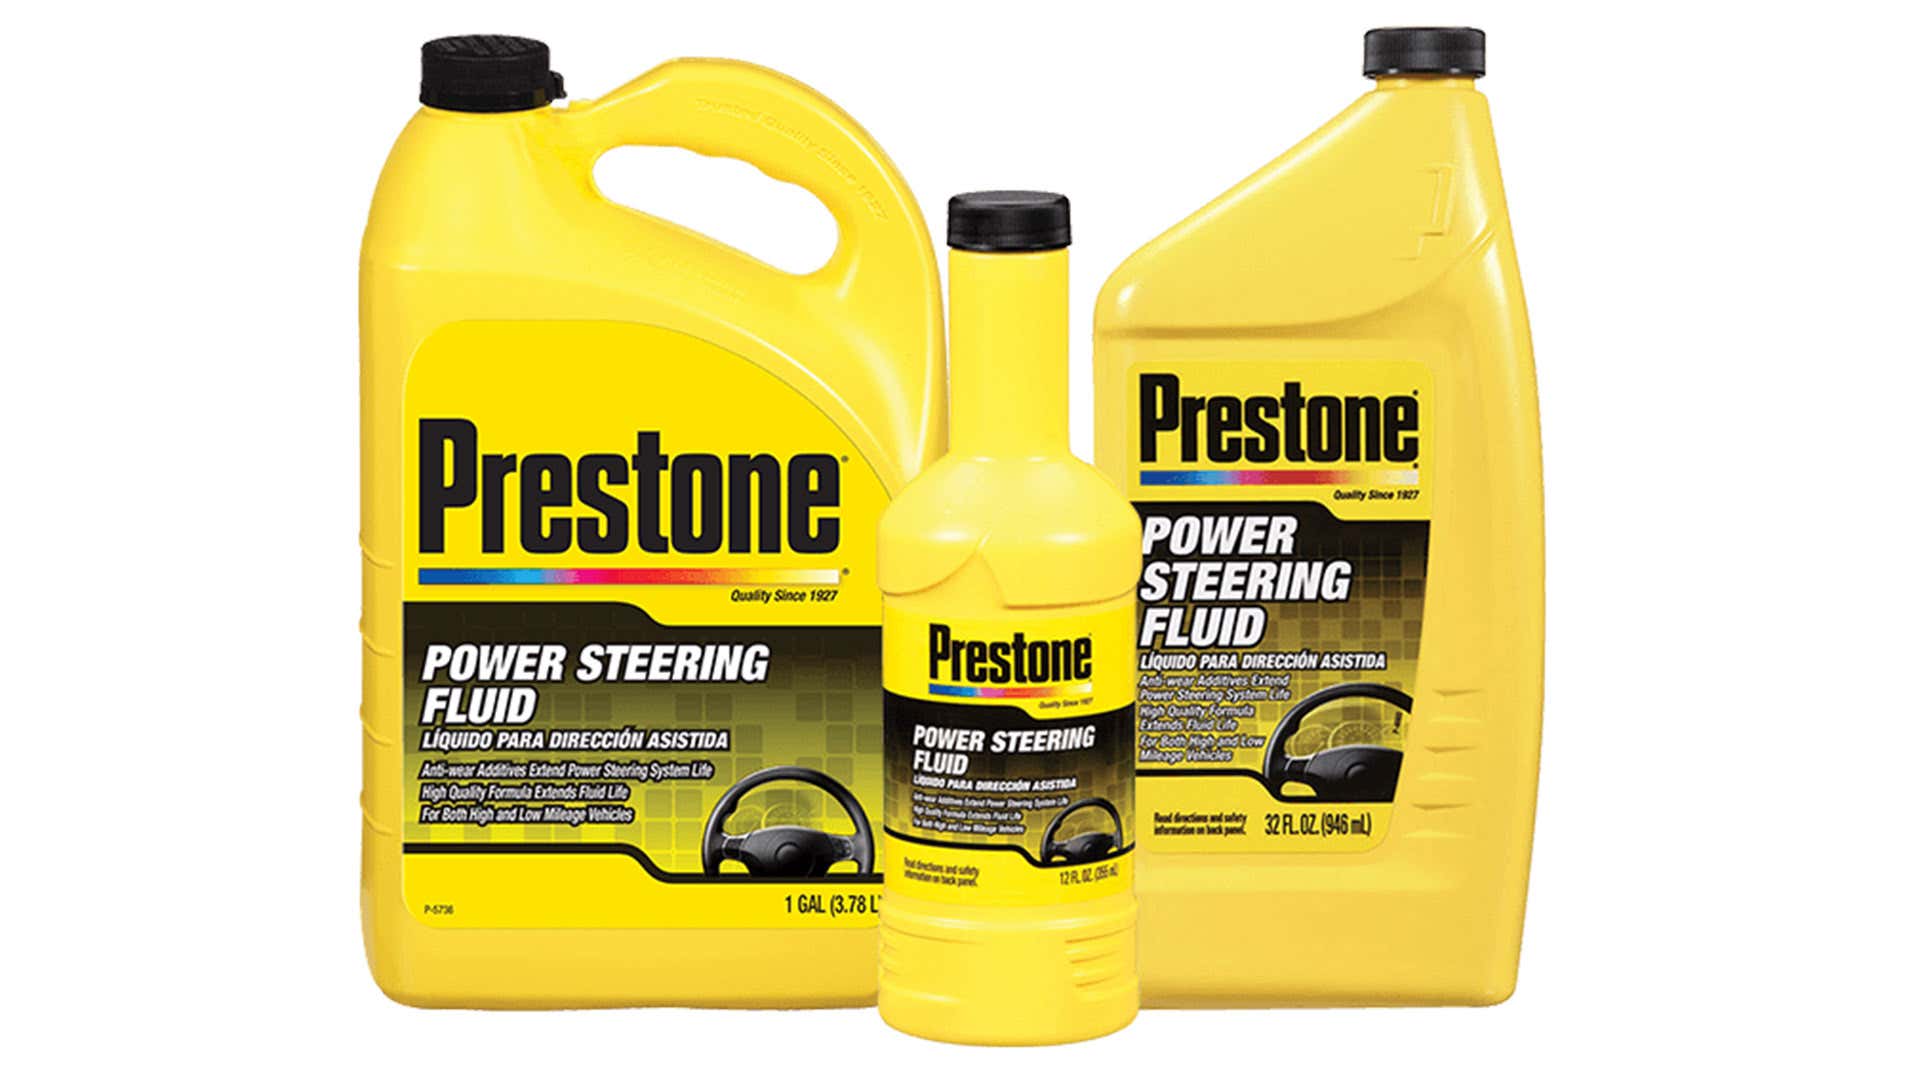 Power steering fluid bottles come in a variety of shapes and sizes.